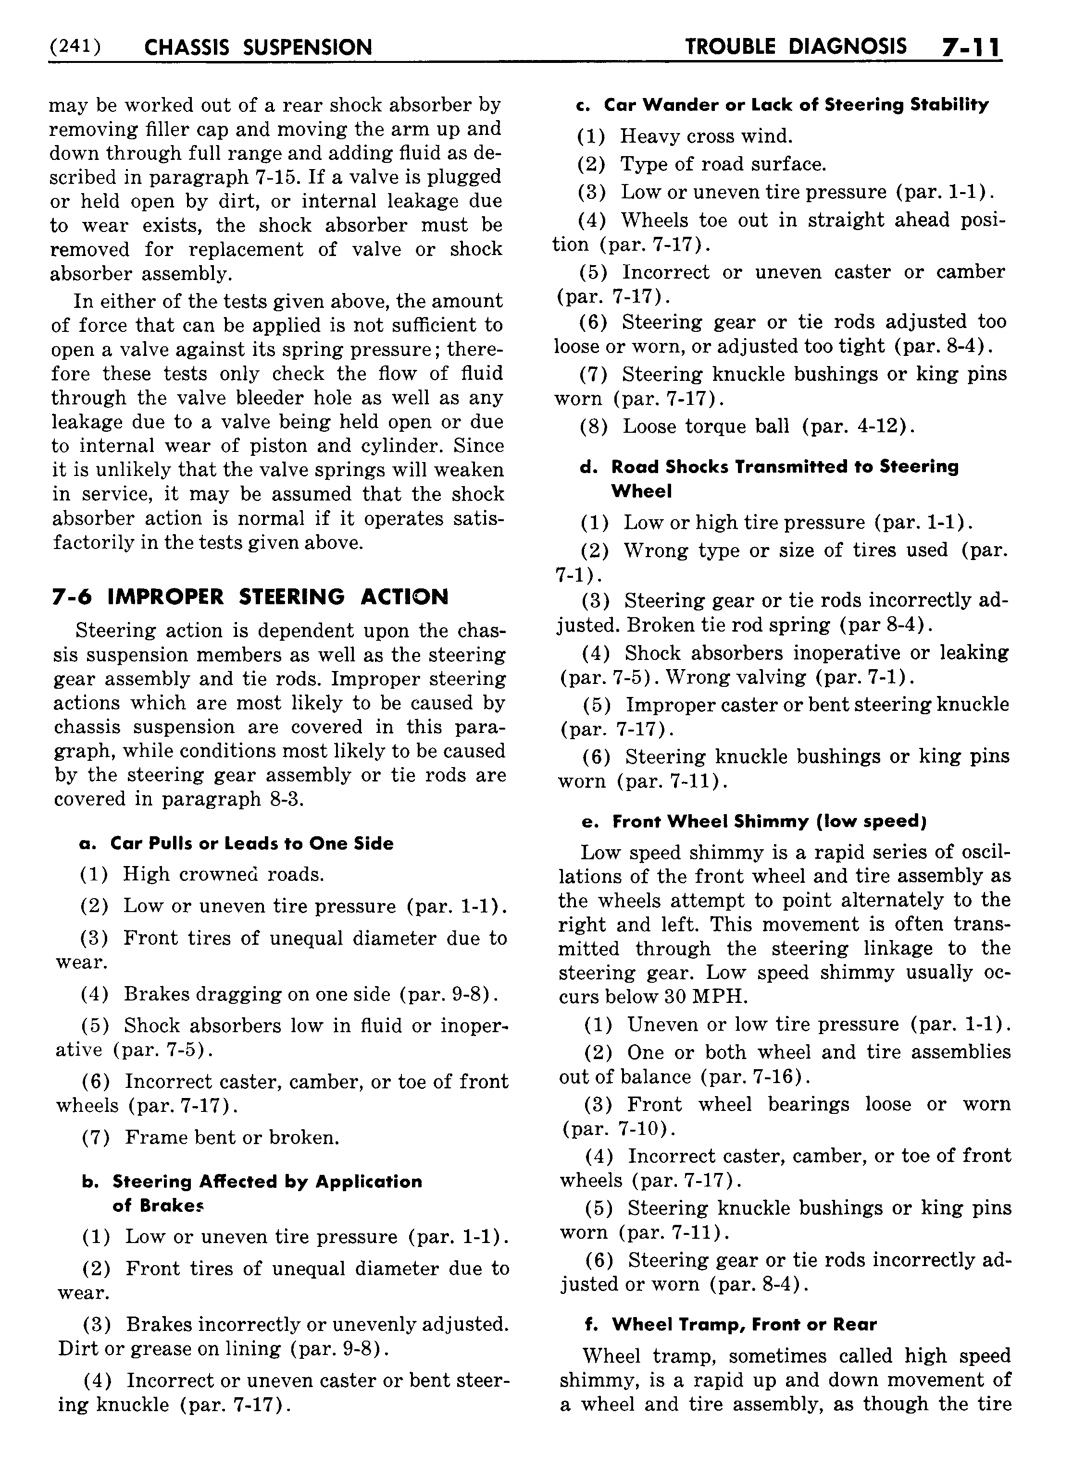 n_08 1954 Buick Shop Manual - Chassis Suspension-011-011.jpg